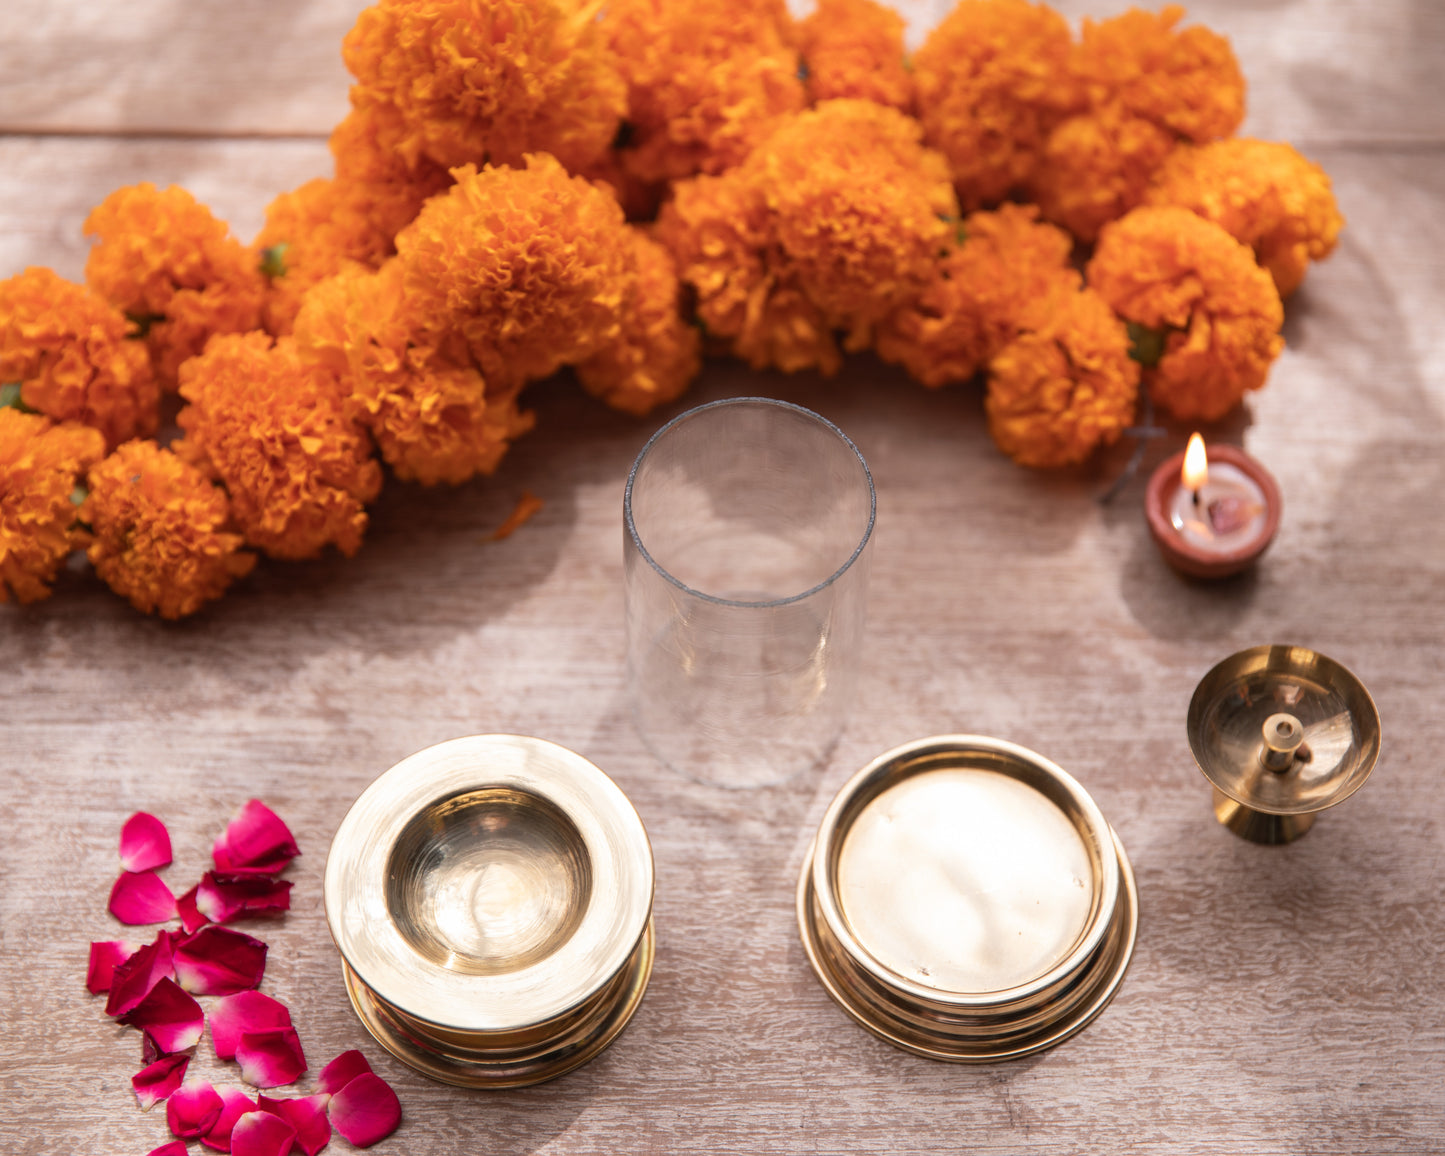 Our Akhand Diya with Dhoop Holder seamlessly combines the timeless tradition of a continuous flame diya with a dedicated space for burning dhoop (incense cones or resin) simultaneously.